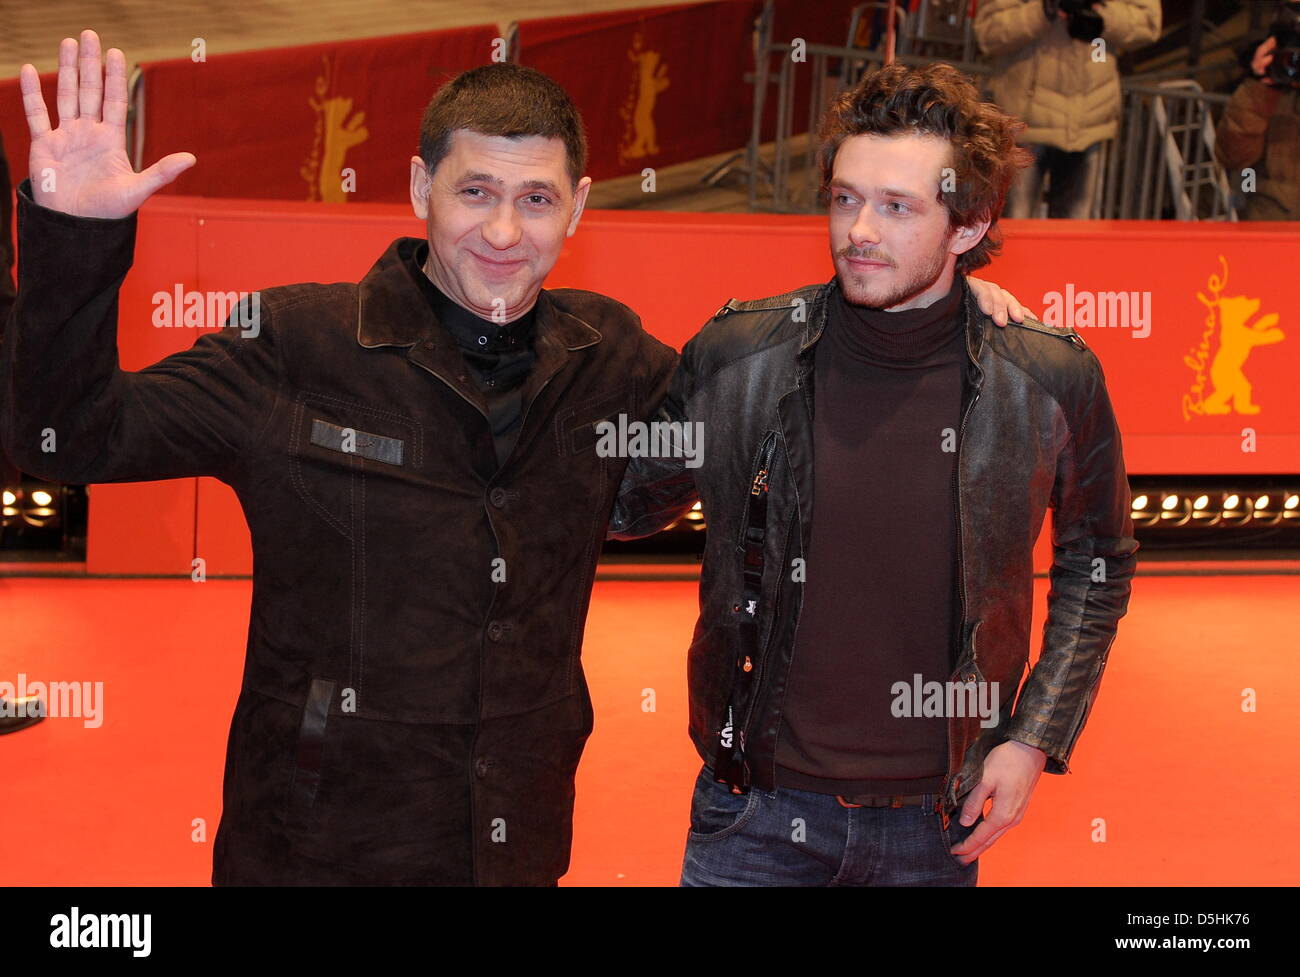 Russian actors Grigory Dobrygin (R) and Sergei Puskepalis arrive for the premiere of the film 'How I Ended This Summer' running in competition during the 60th Berlinale International Film Festival in Berlin, Germany, Wednesday, 17 February 2010. The festival runs until 21 Febuary 2010. Photo: Jens Kalaene dpa/lbn Stock Photo